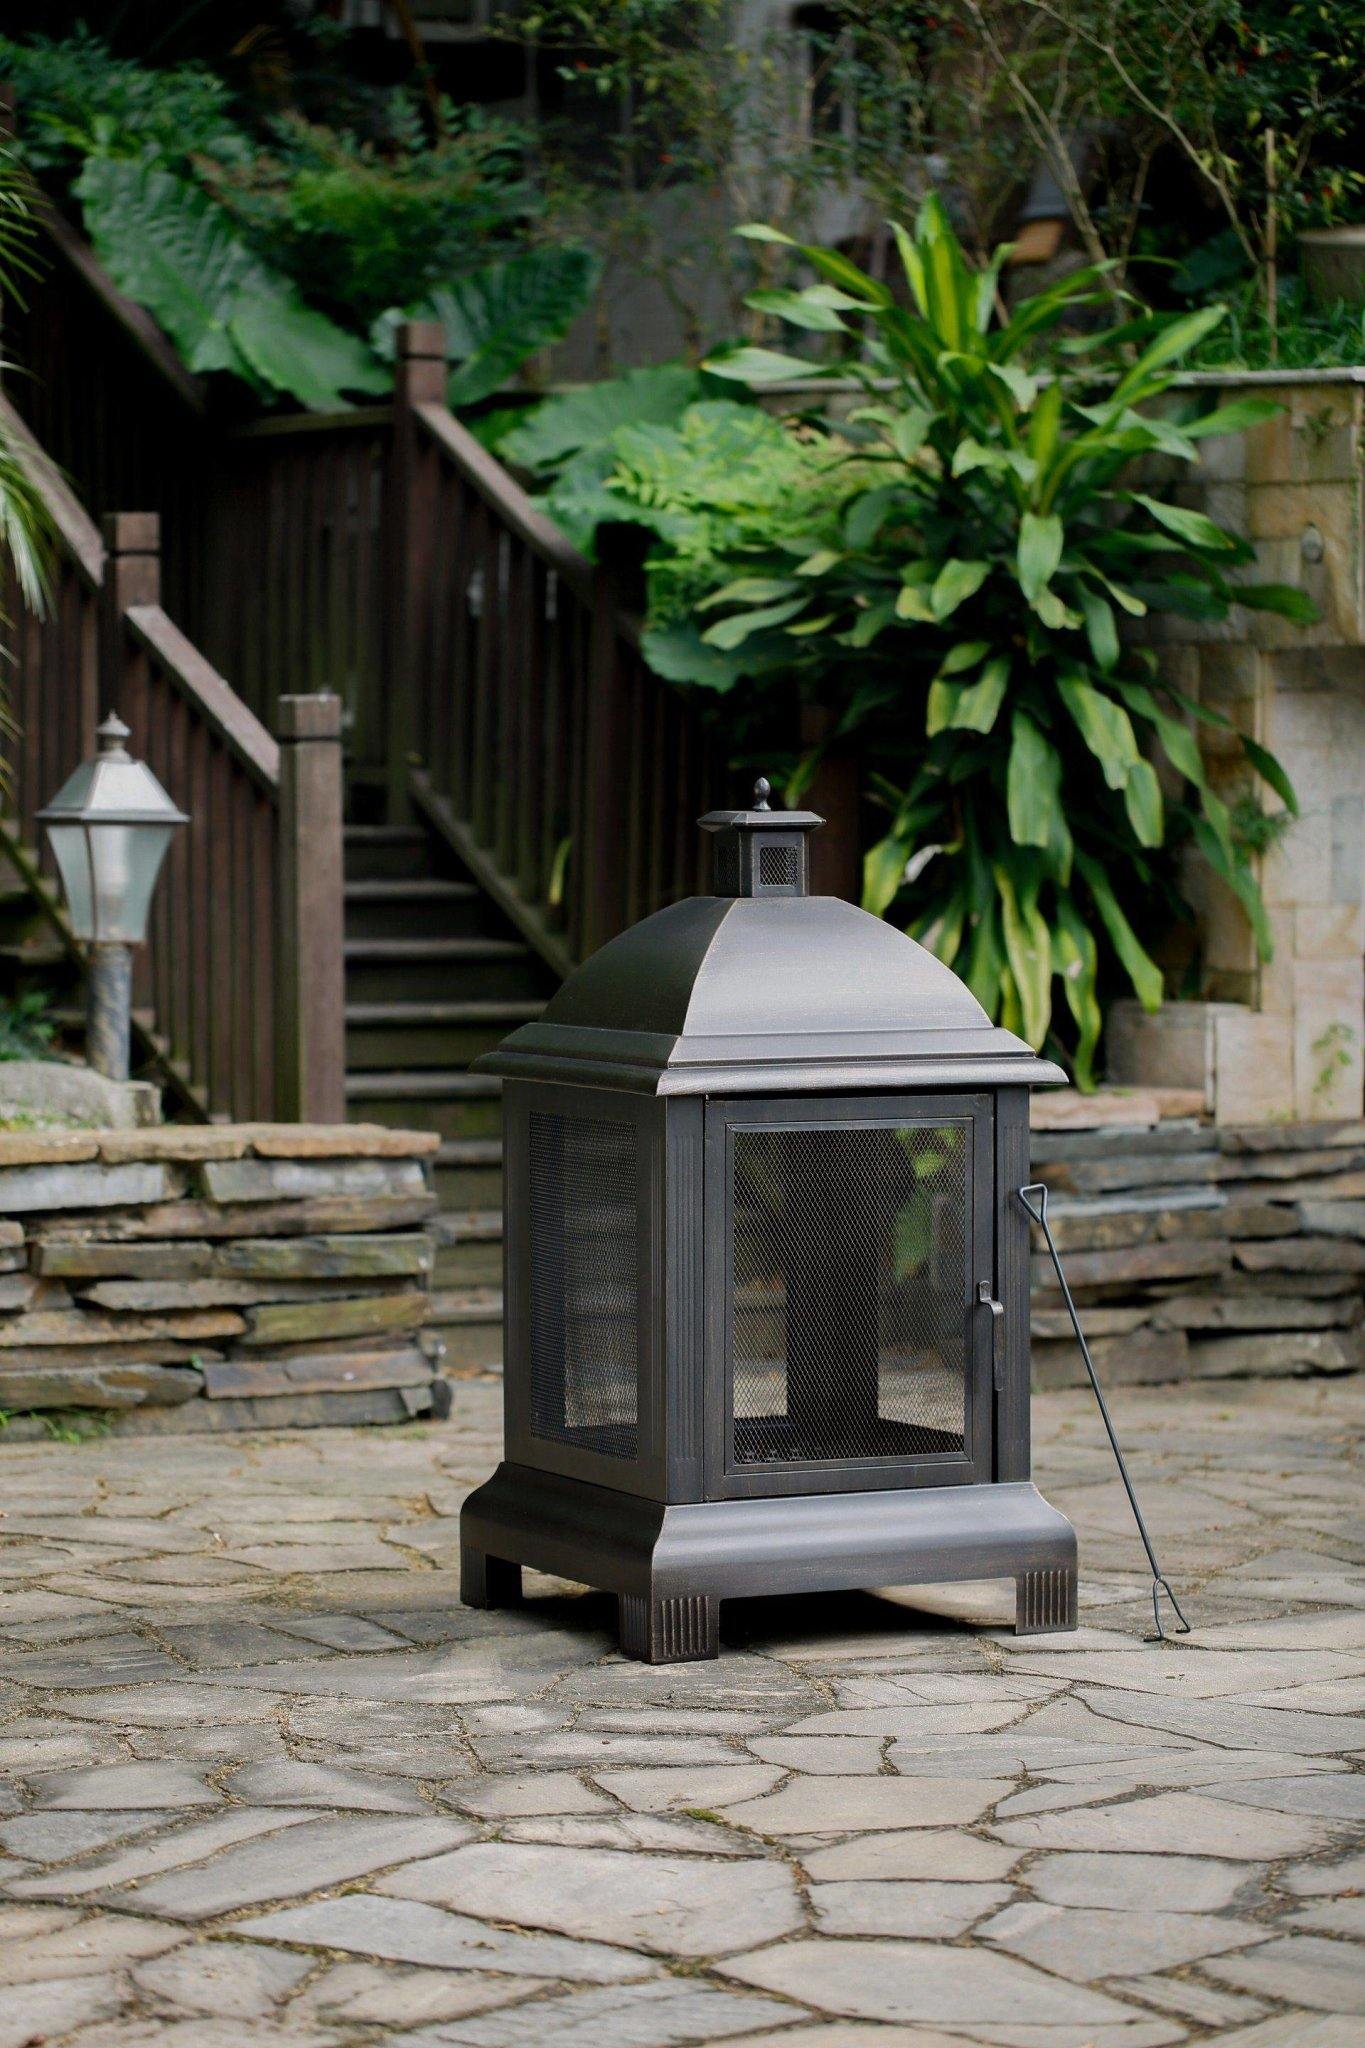 Outdoor Steel Fireplace - Dti Direct USA